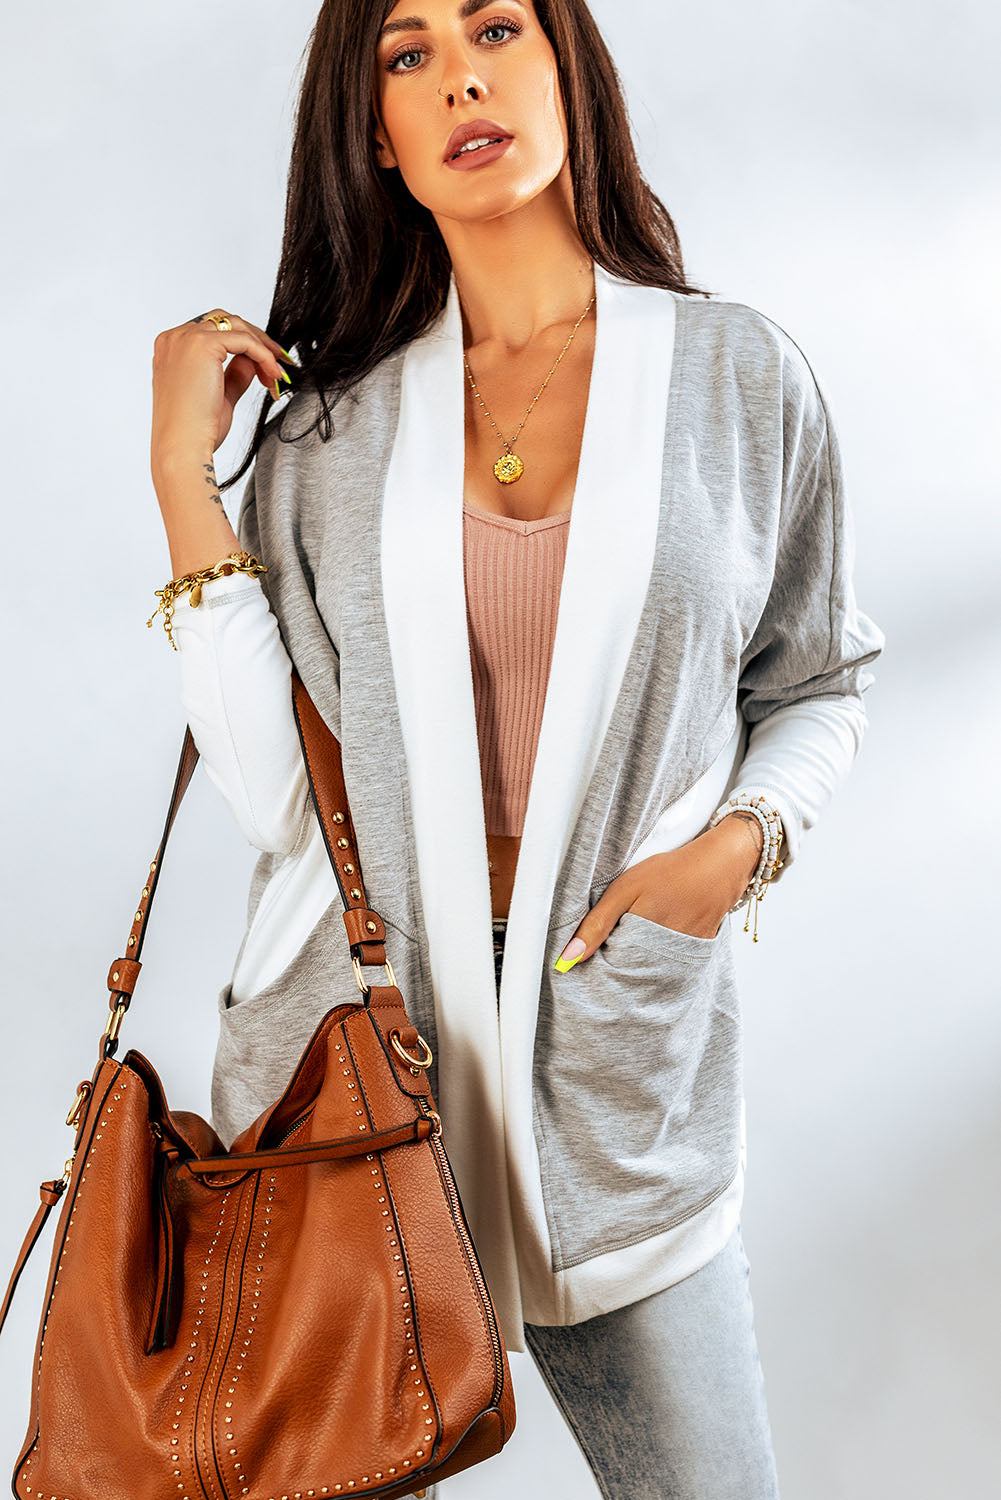 Trendsi Cupid Beauty Supplies Woman Cardigan Contrast Open Front Cardigan with Pockets